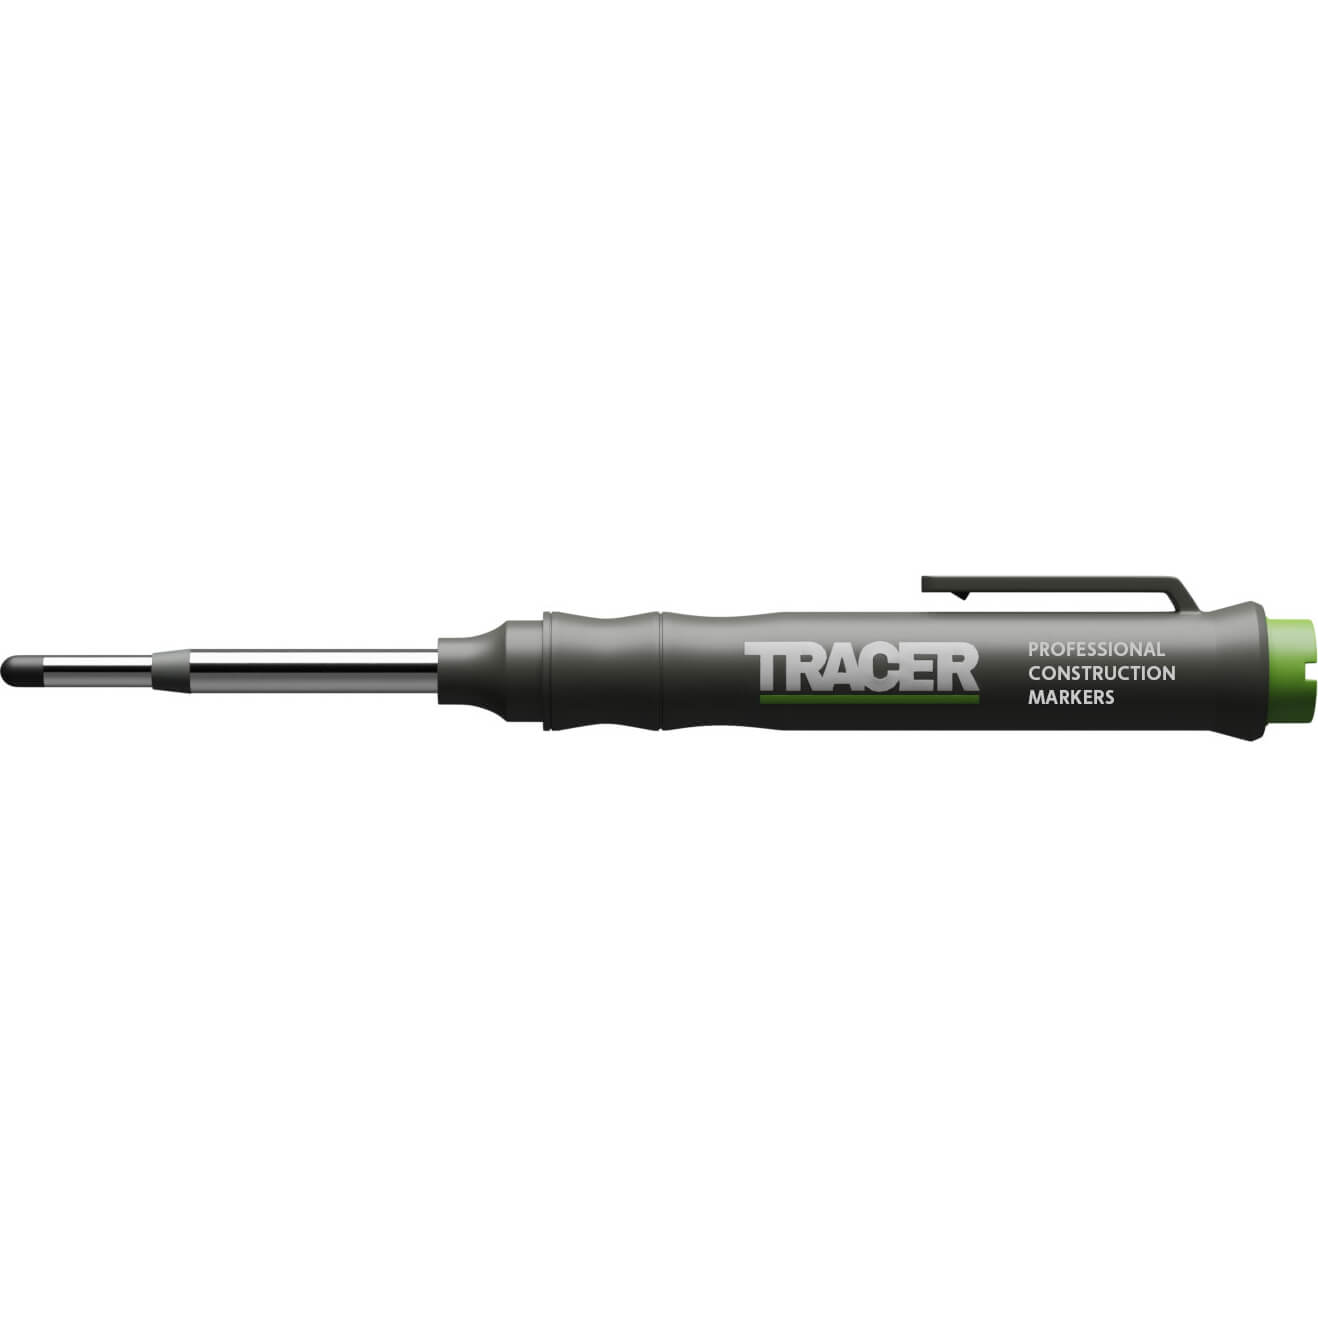 Image of Tracer Double Tipped Marker Pen and Site Holster